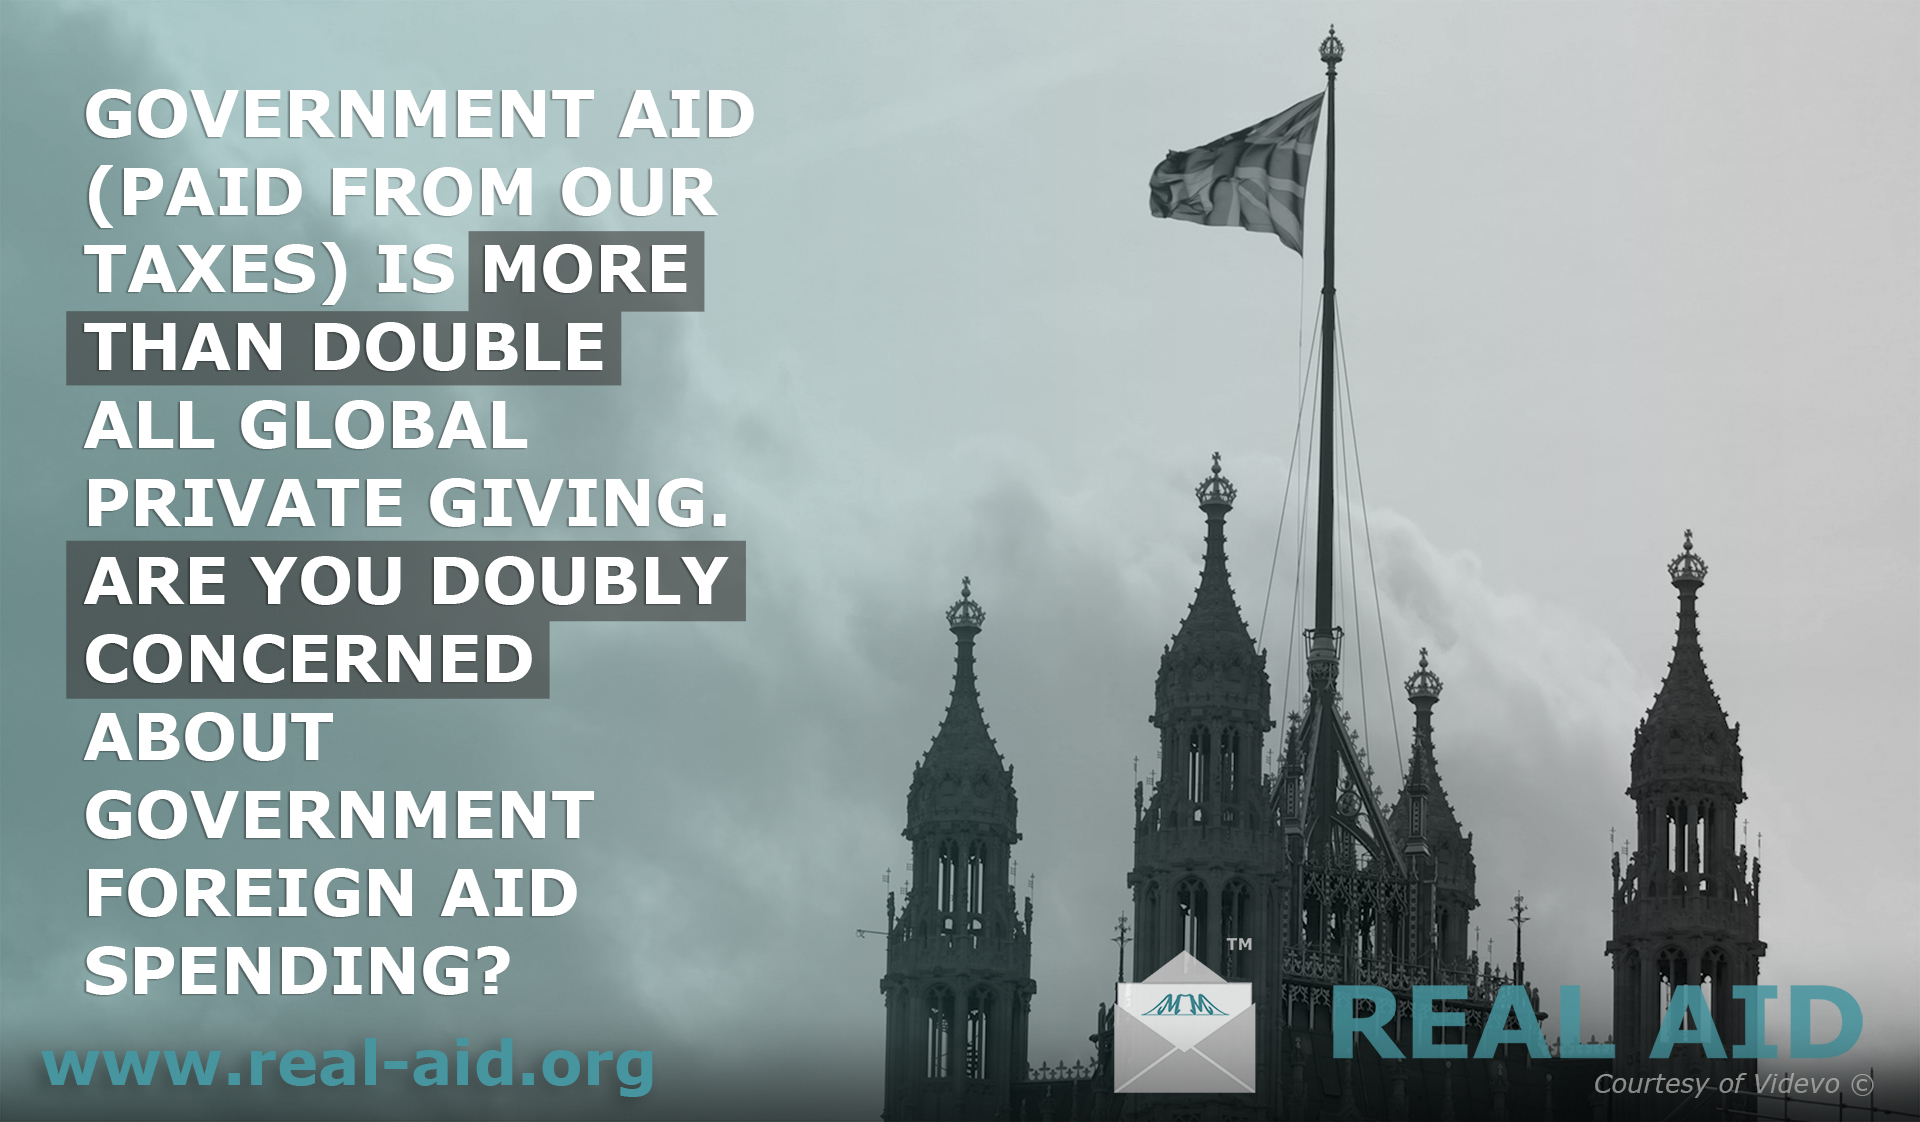 Real Aid poster, "are you concerned adout government foreign aid spending" text, image of westminster and union jack